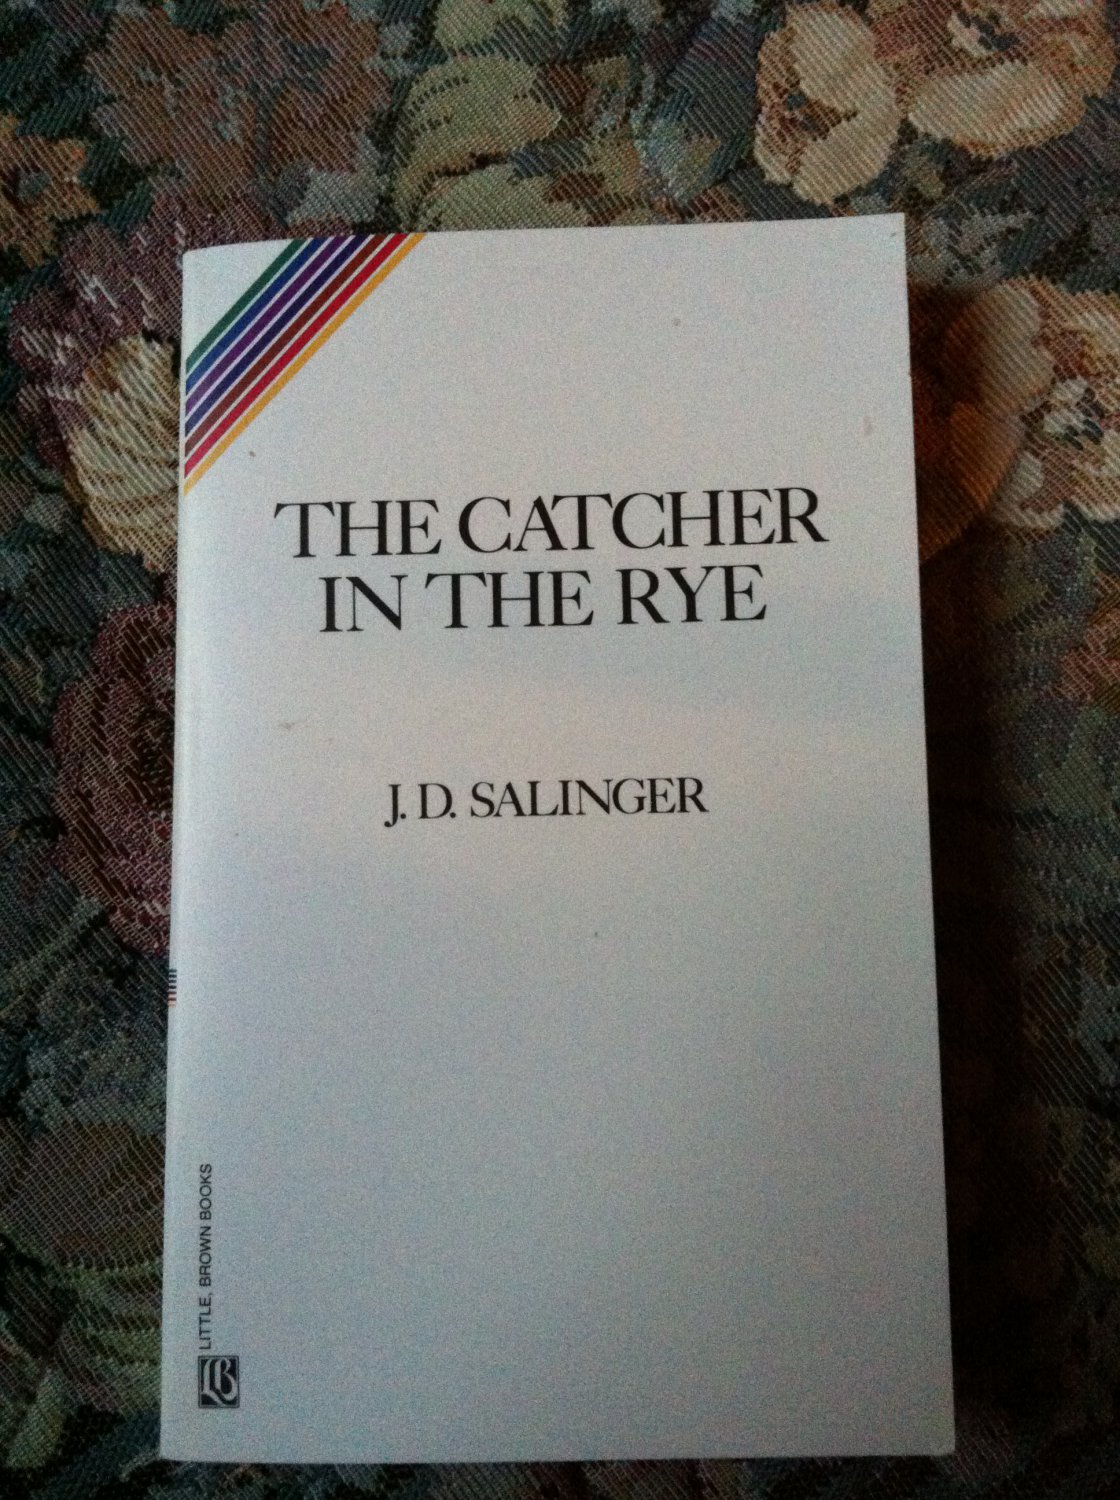 the catcher in the rye movie